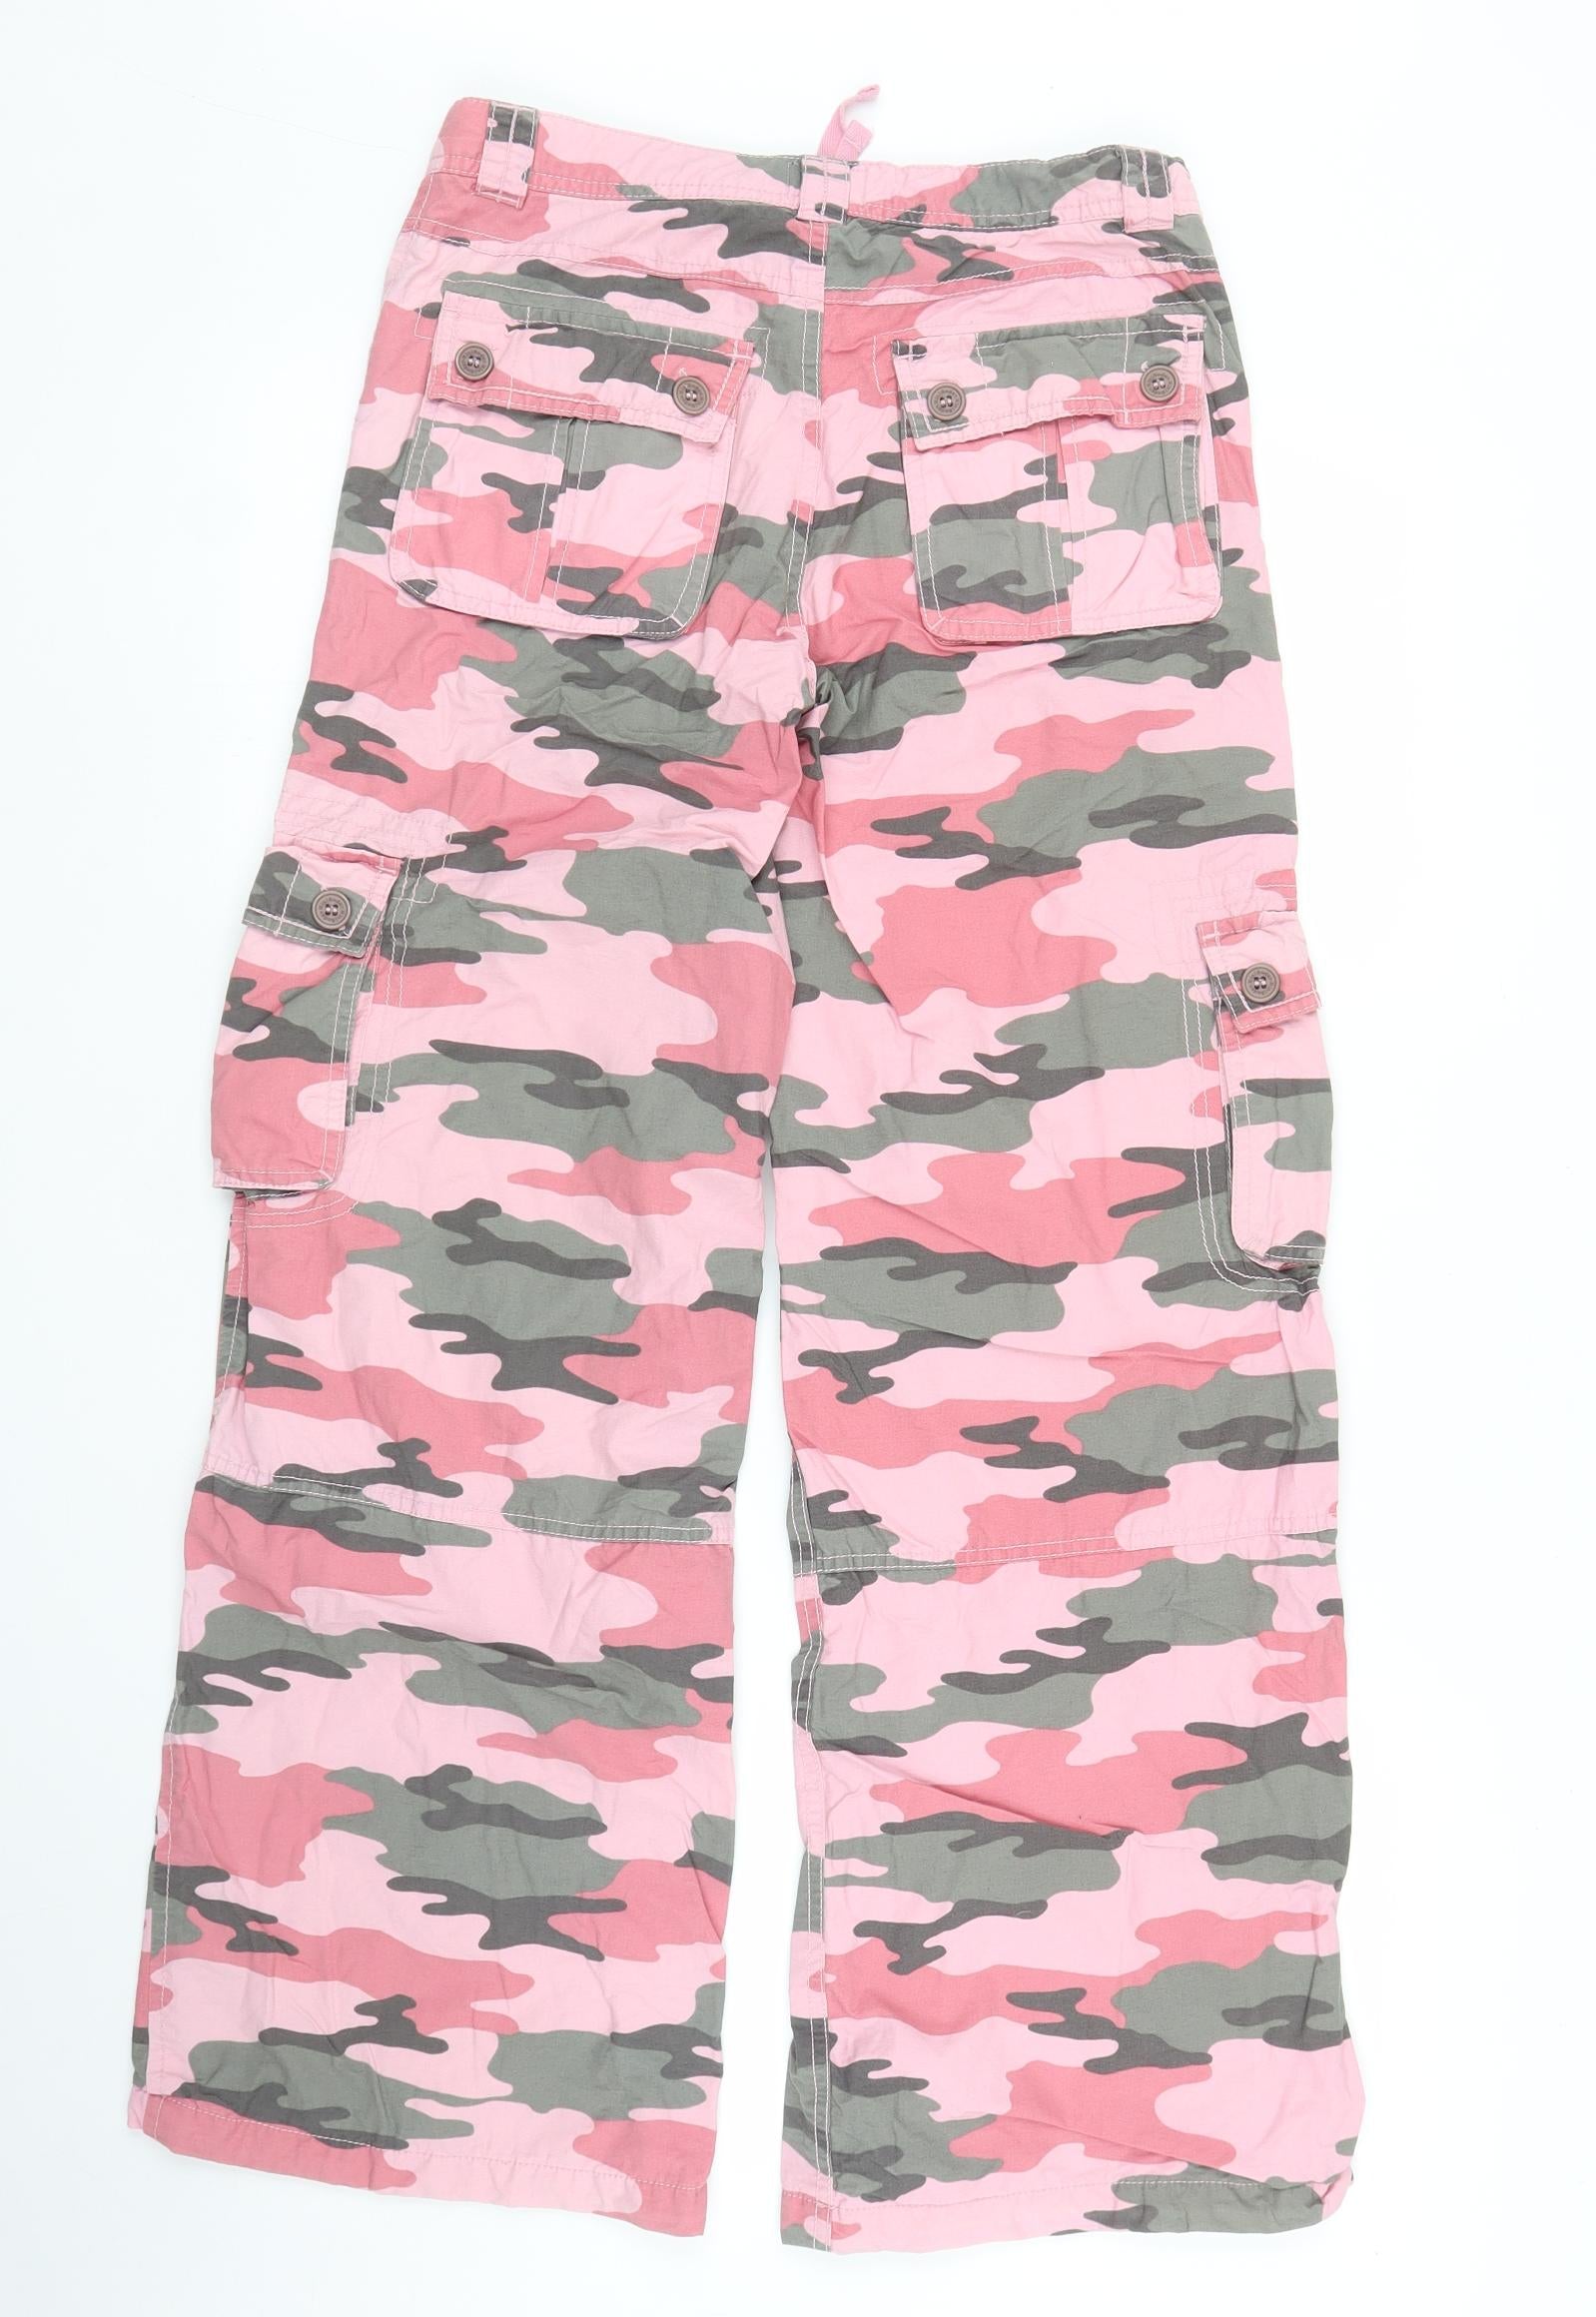 Sexy Camouflage Punk Camouflage Trousers Women For Women Loose Fit, Hip Hop  Dance Baggy Pants In Pink, Orange, Purple, And Pink 201106 From Mu03,  $18.37 | DHgate.Com